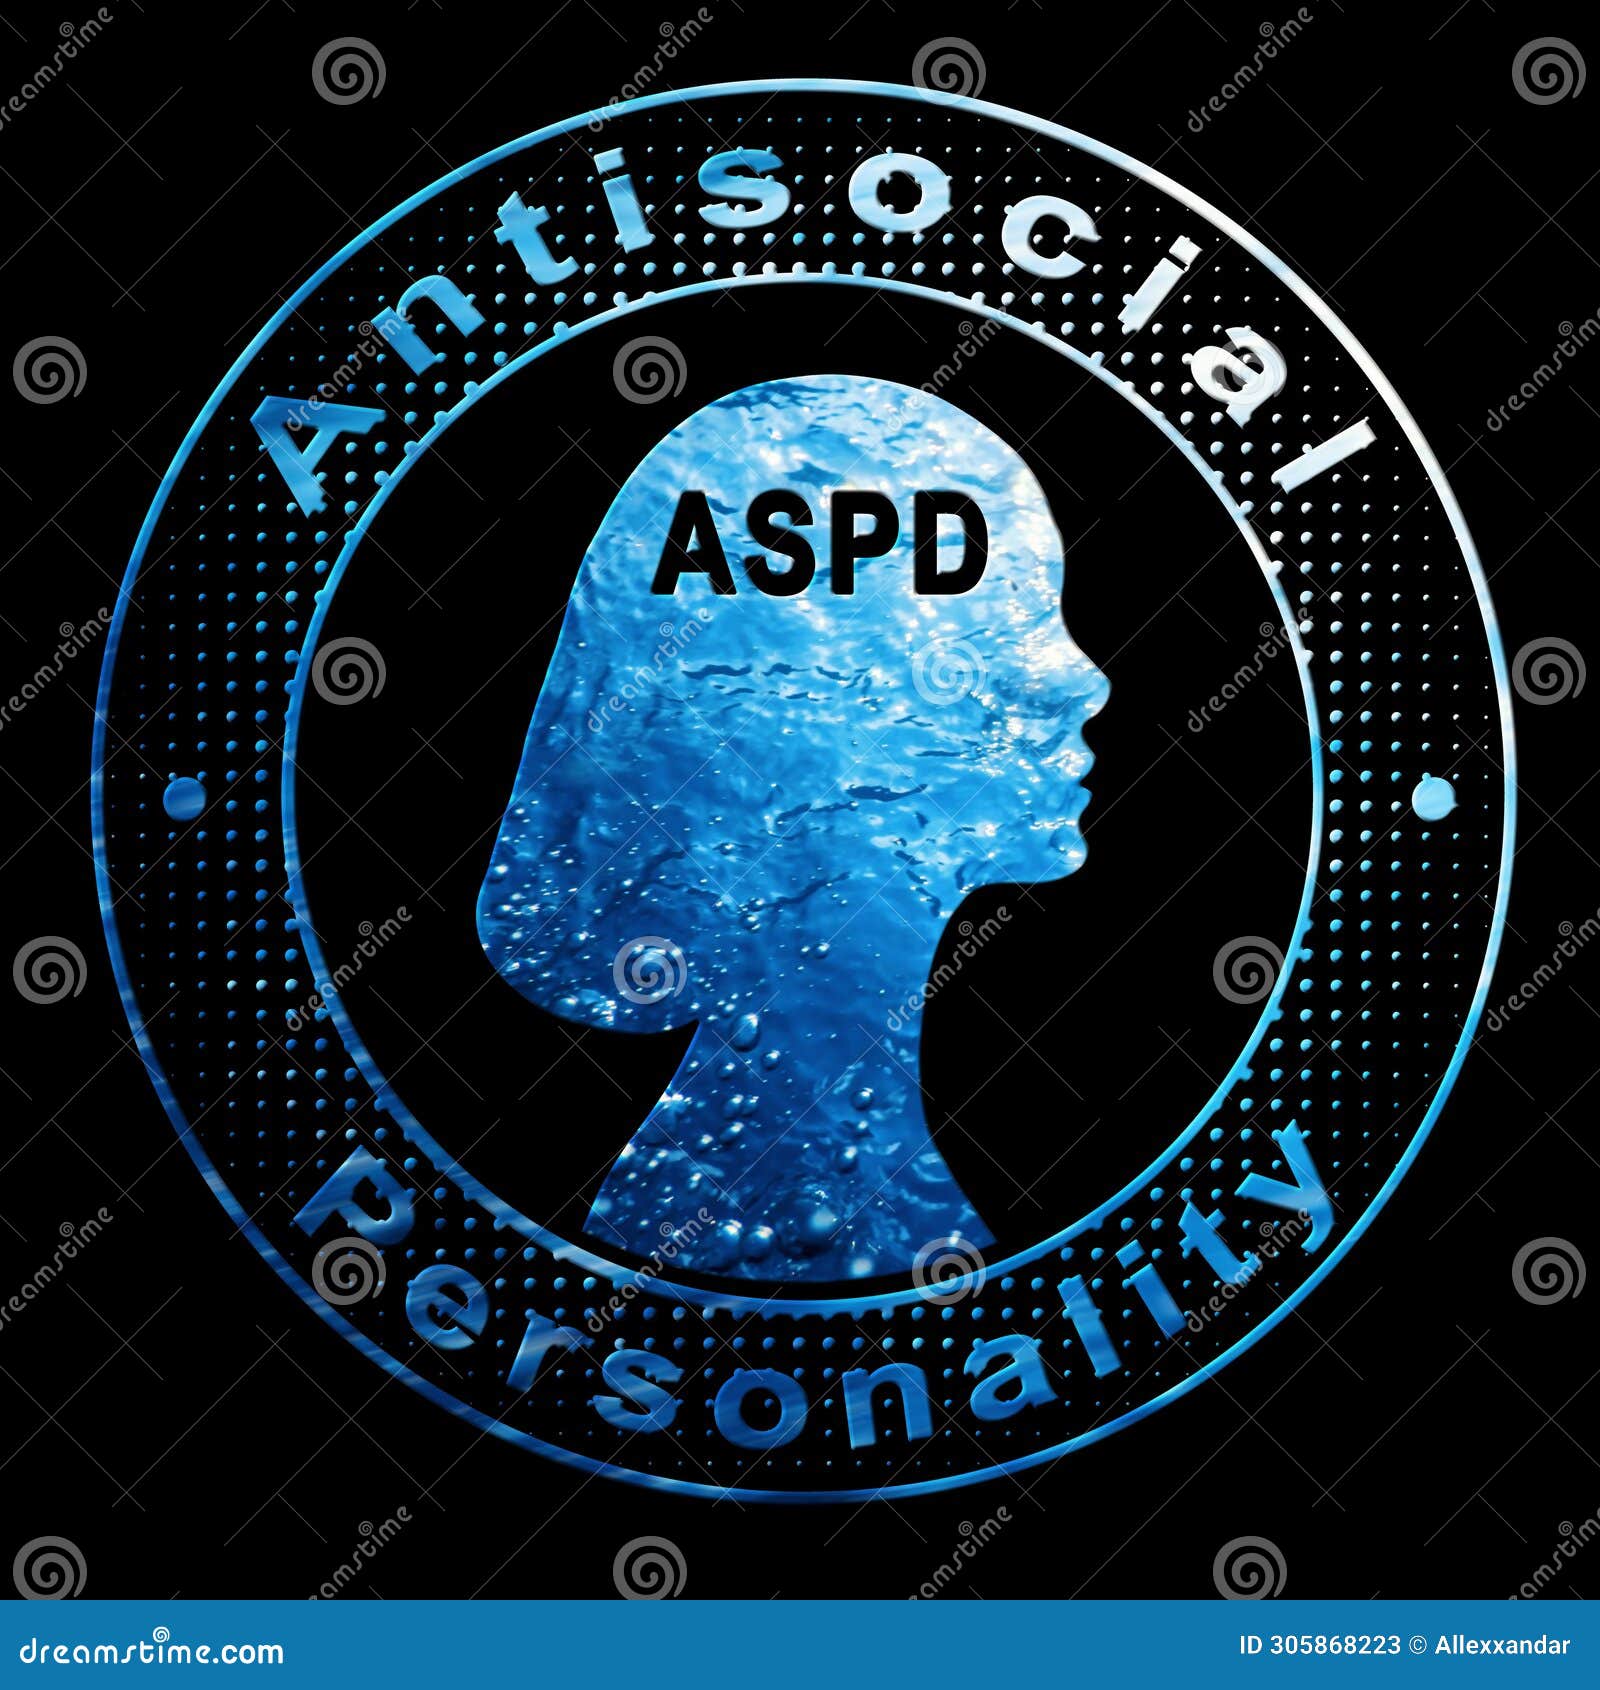 antisocial personality disorder, aspd, woman psychology concept